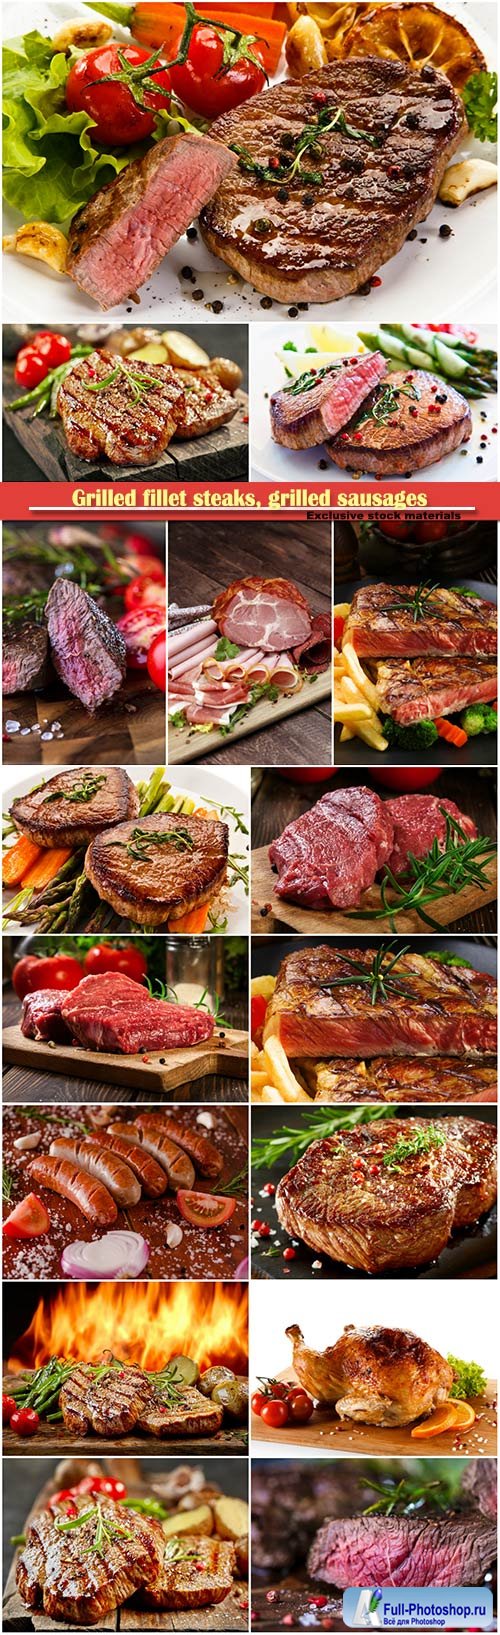 Grilled fillet steaks, grilled sausages and vegetables, tomato and onion